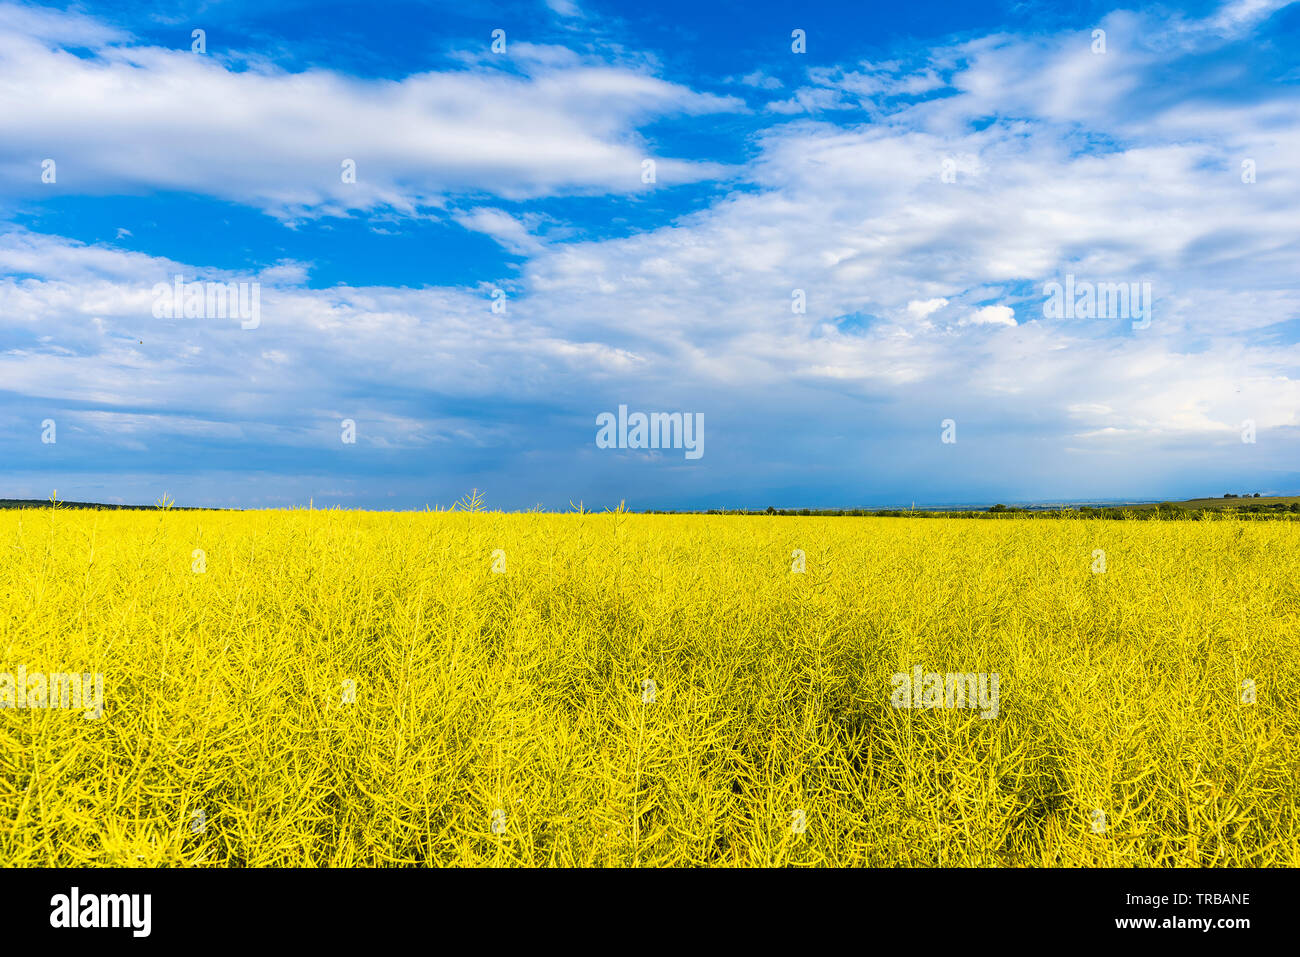 Field of Golden wheat under the blue sky and clouds Stock Photo